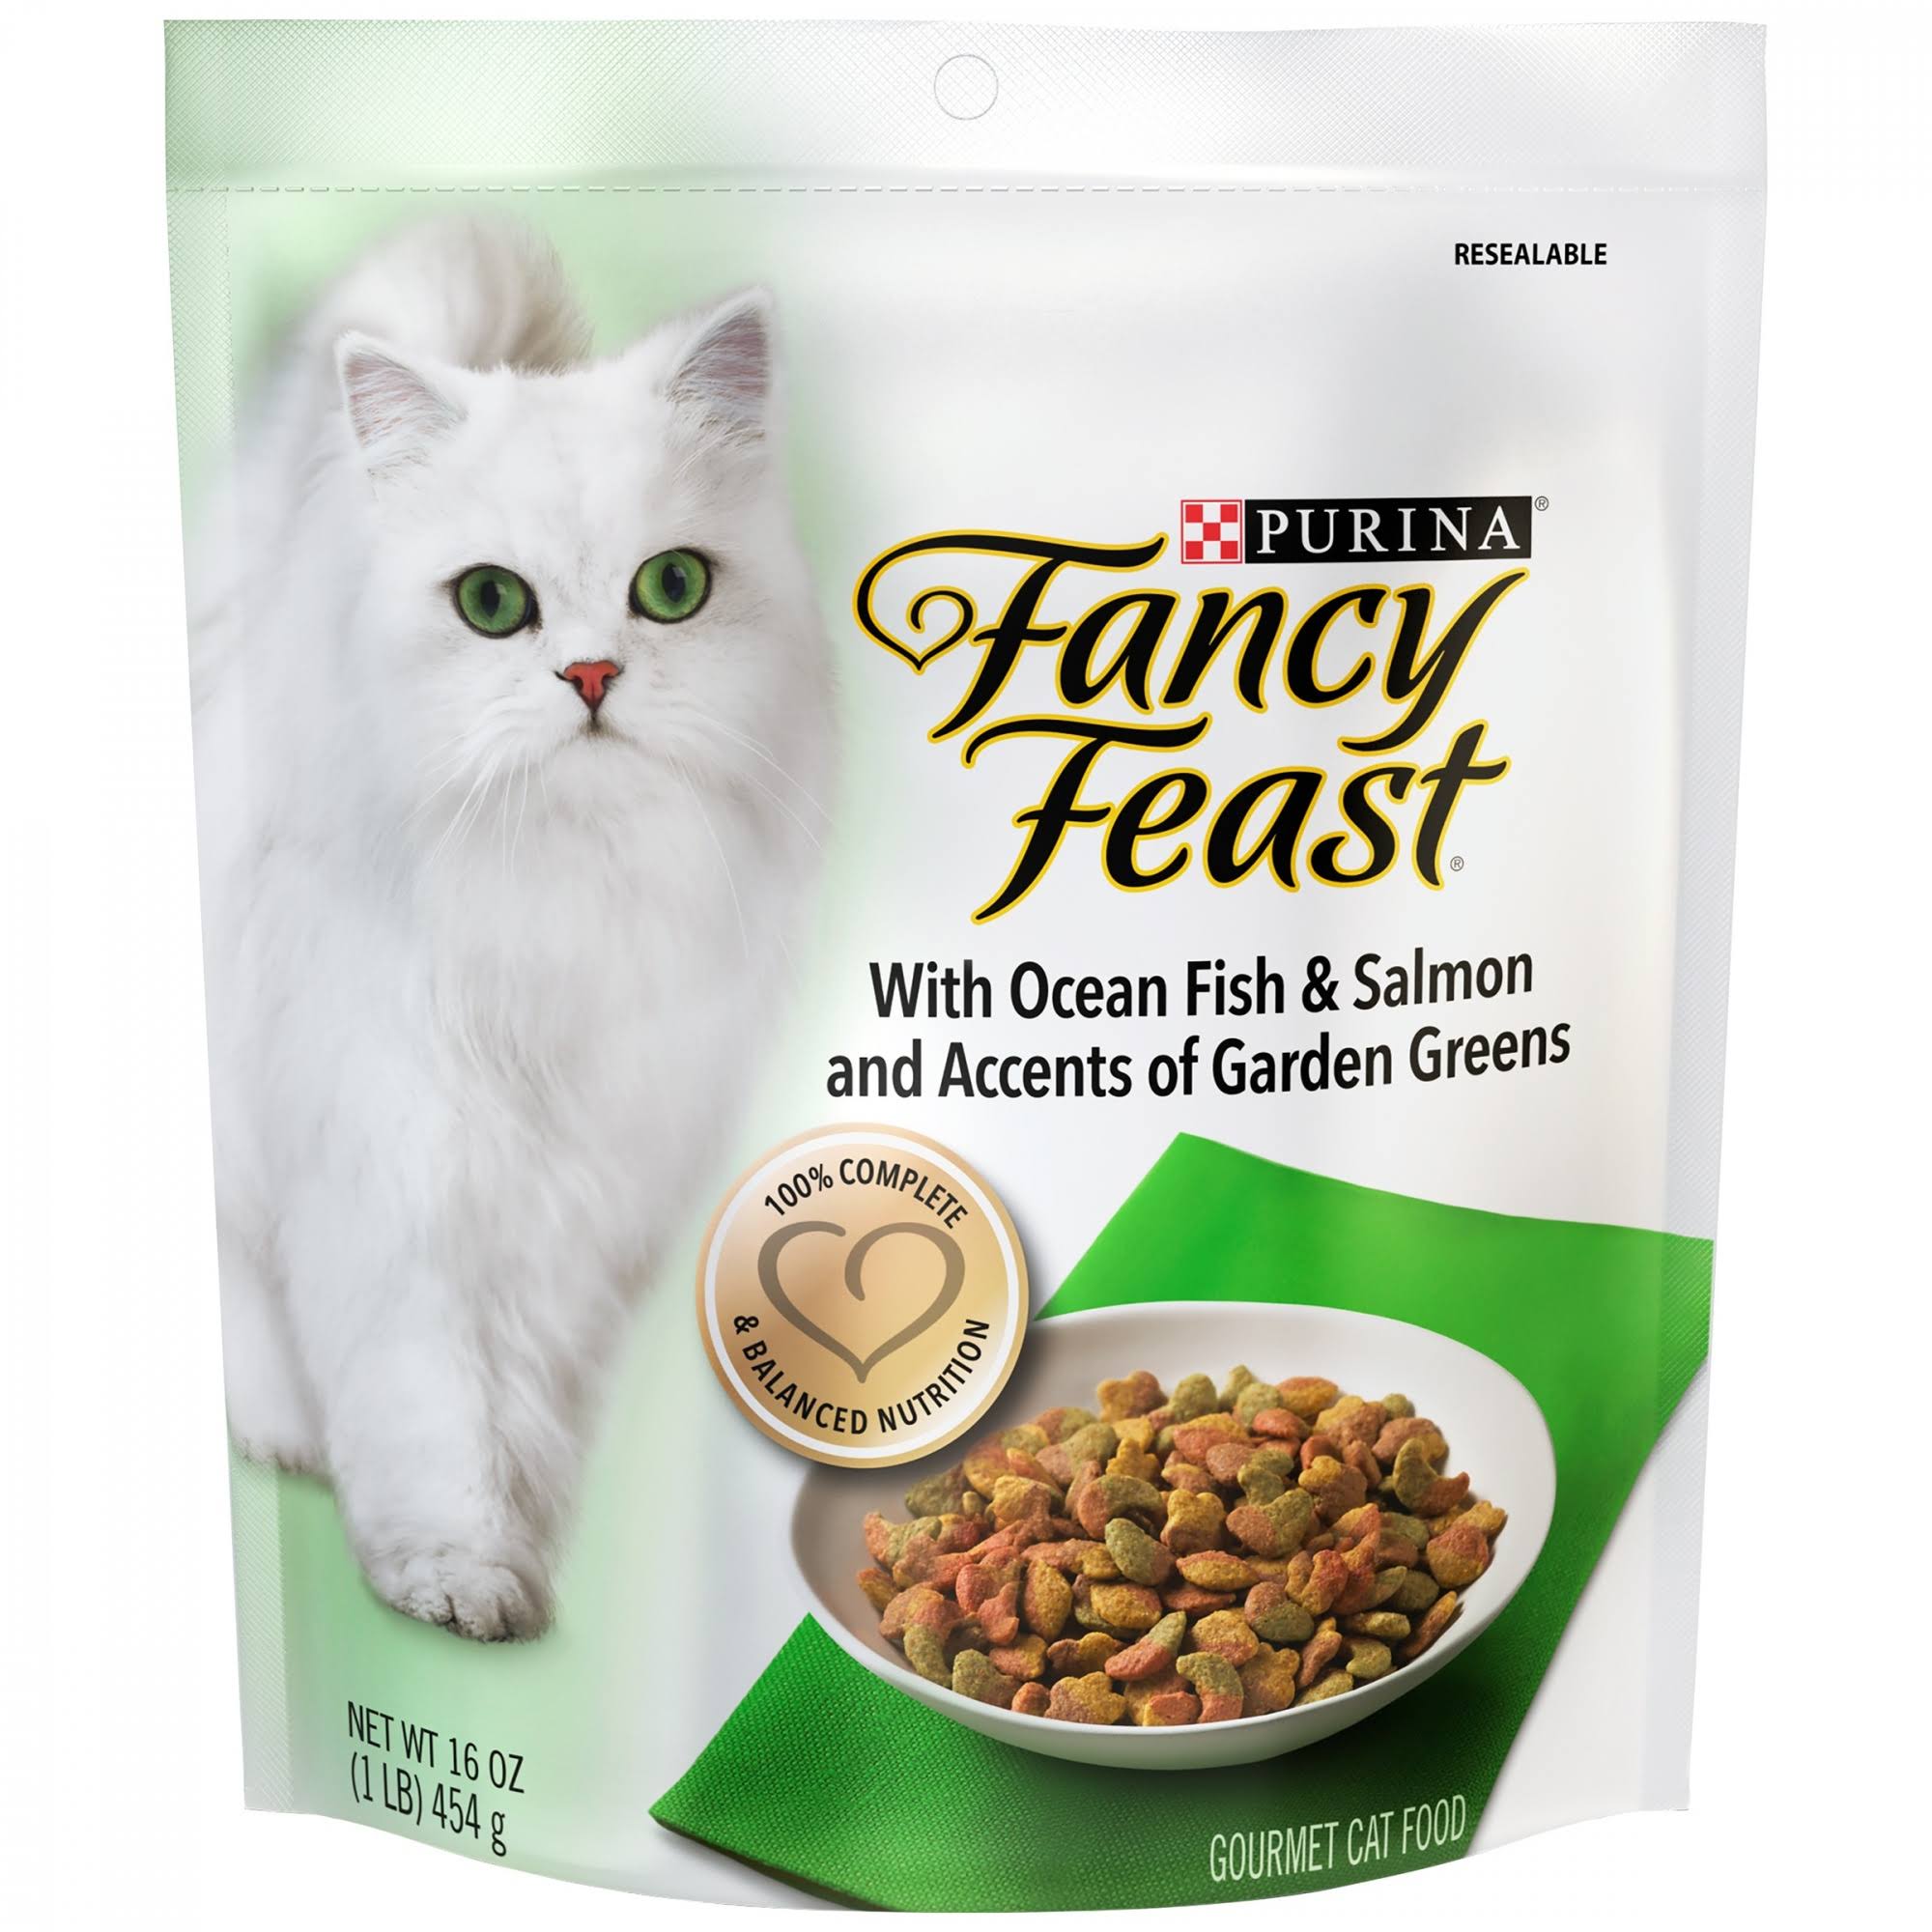 Purina Fancy Feast Gourmet Cat Food - Ocean Fish and Salmon and Accents of Garden Greens, 16oz